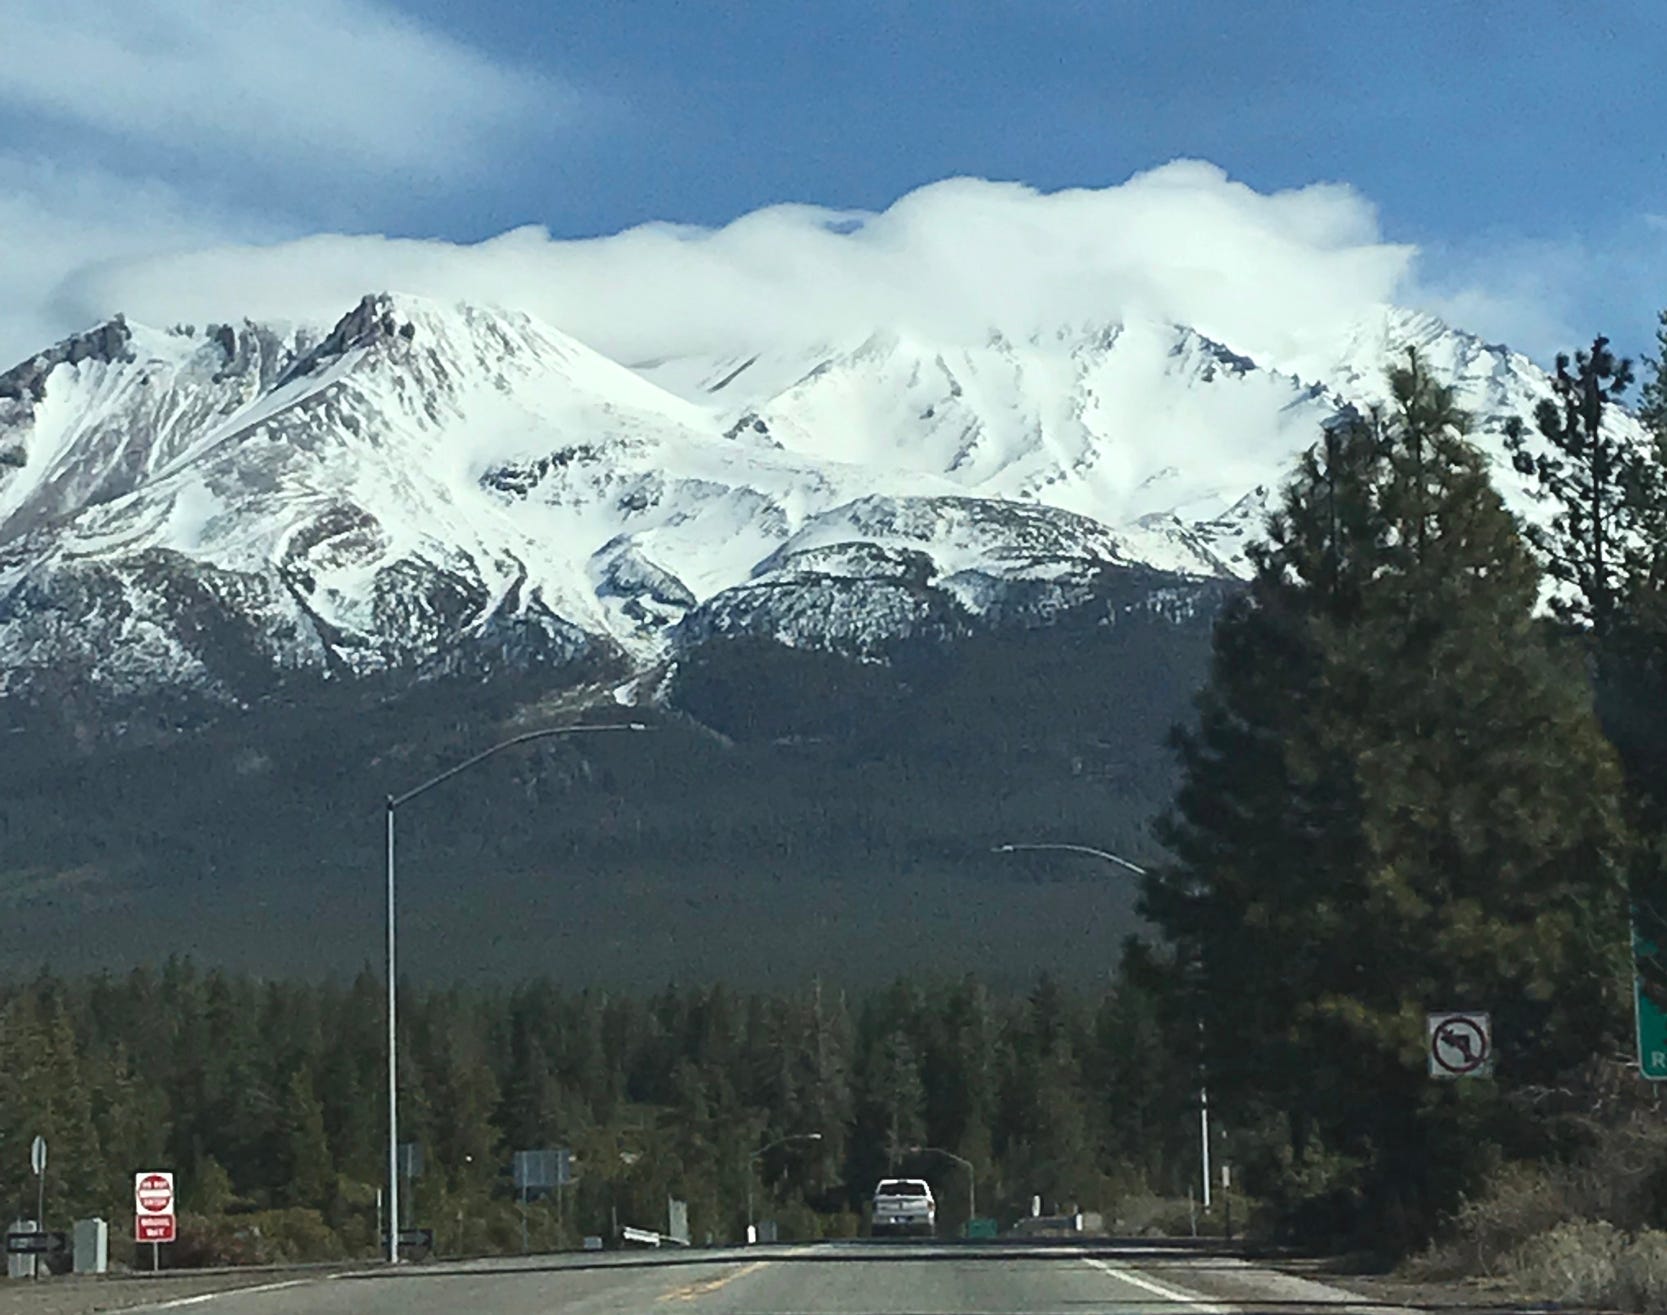 A wavy lenticluar cloud over Mount Shasta, taken from the Abranm's Lake overpass on Interstate 5 and submitted by Kevin Hemholtz.